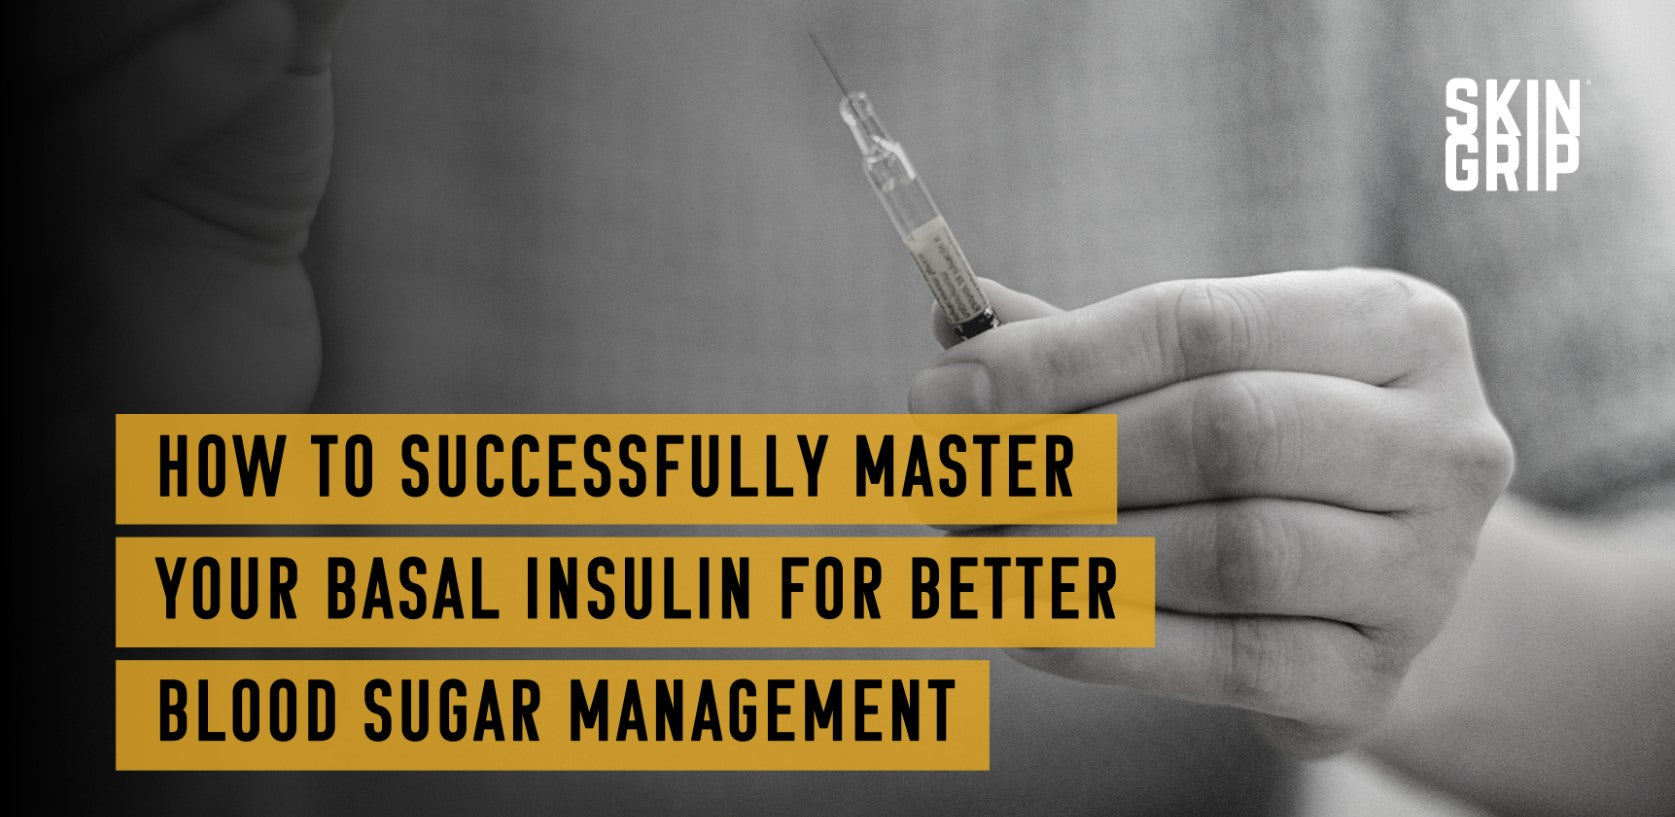 Diabetes Basics: How to Successfully Master Your Basal Insulin for Better Blood Sugar Management